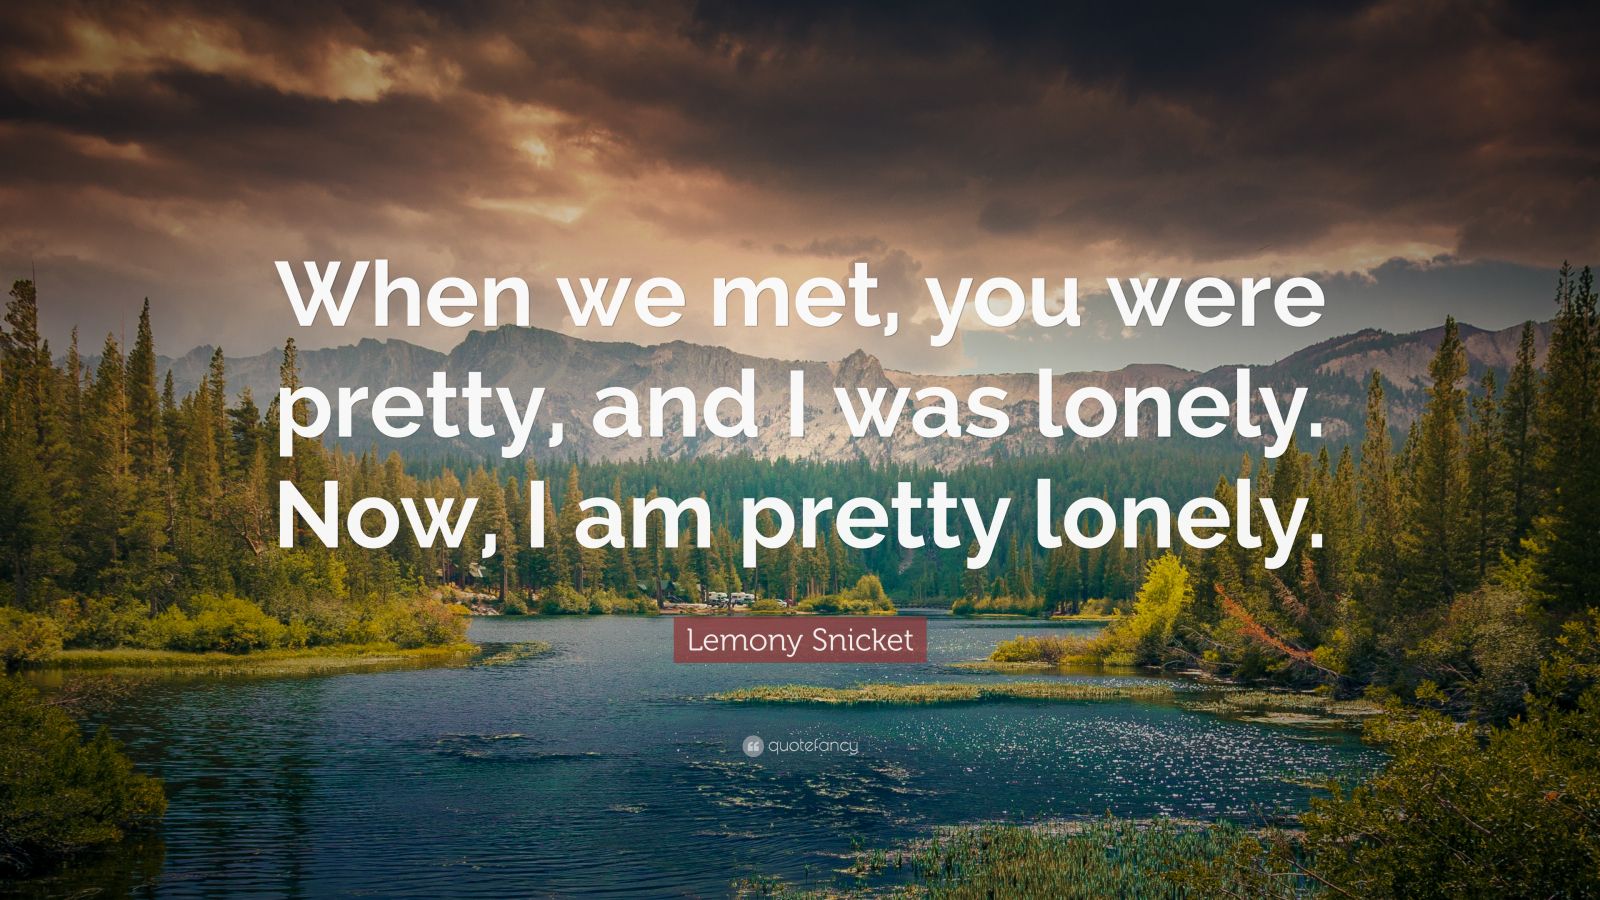 Lovely & Lonely — What were you before you met me? I